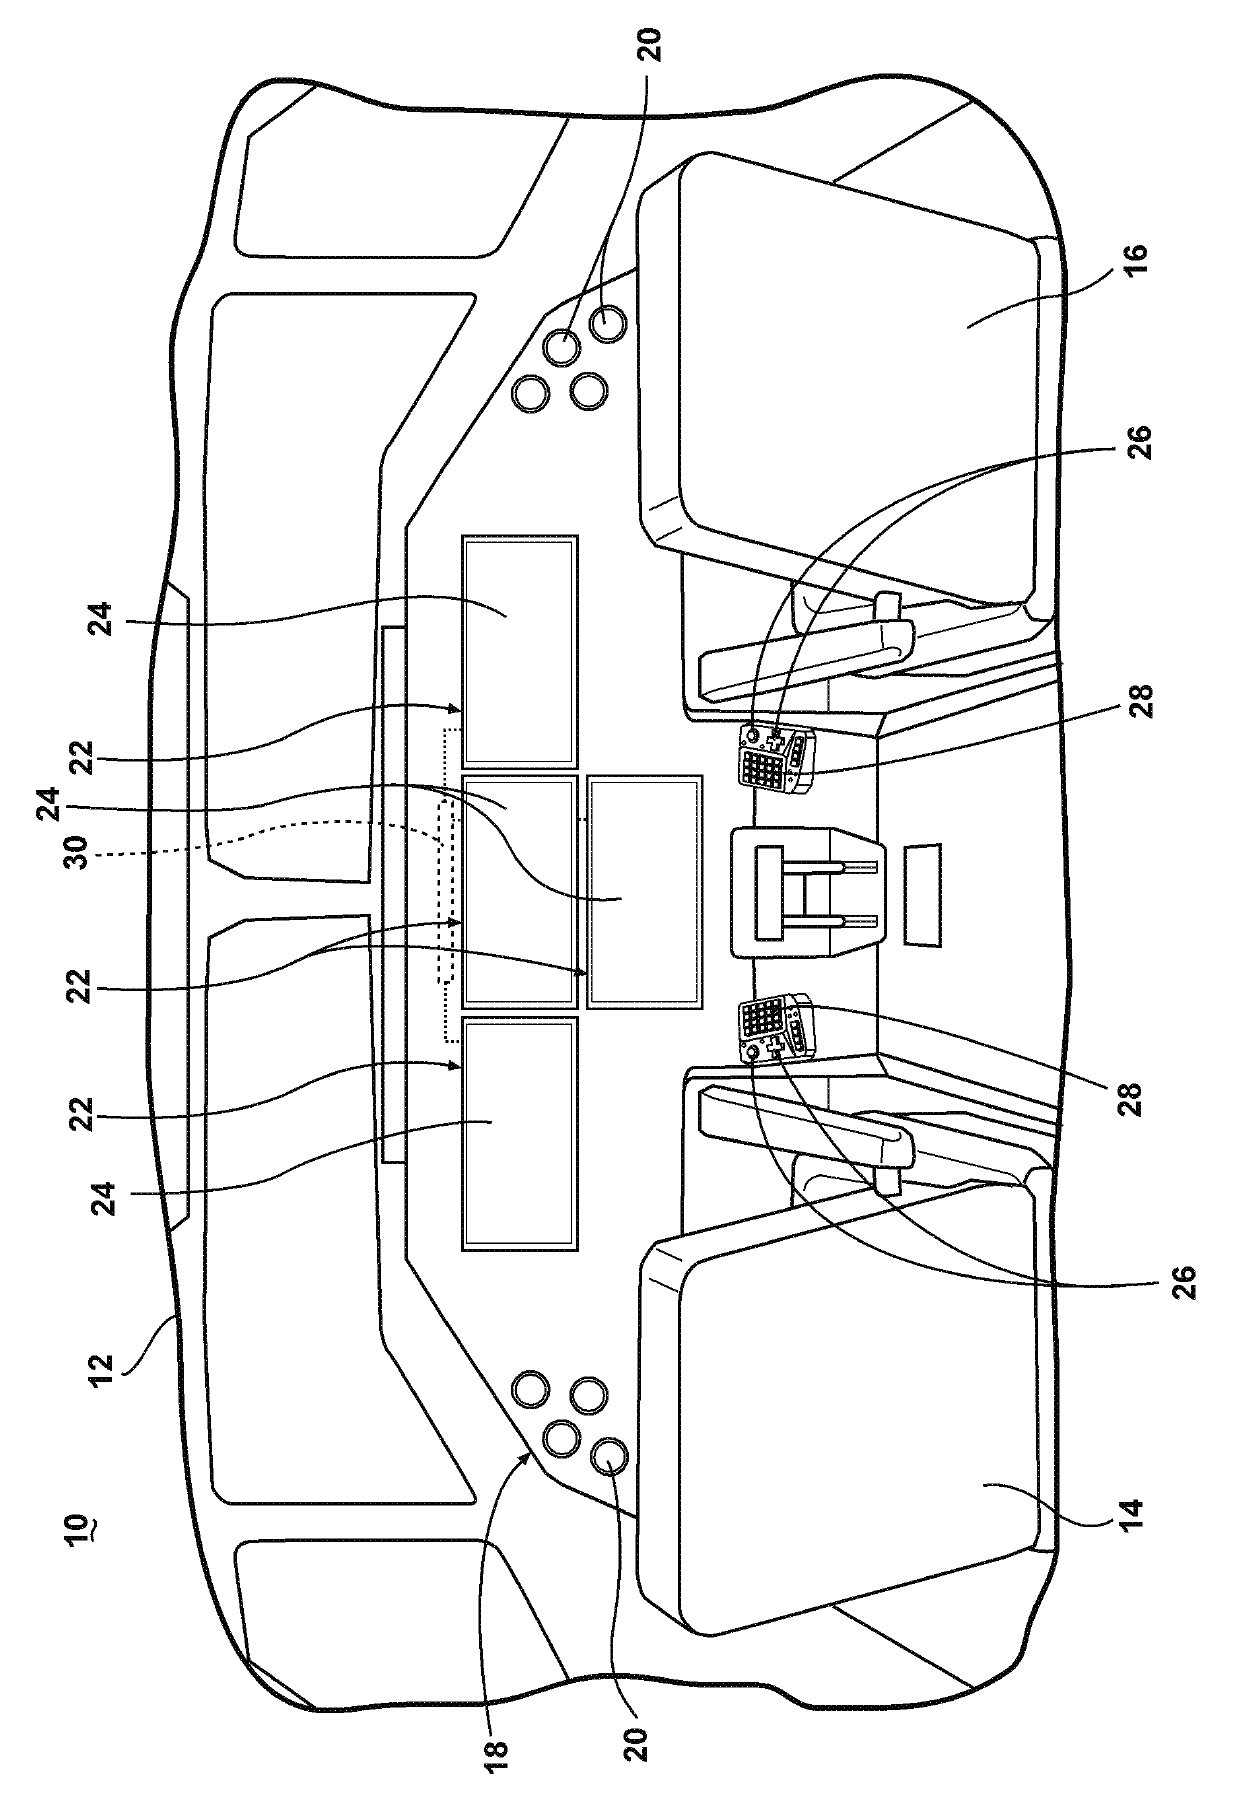 Method for illustrating aircraft situational information